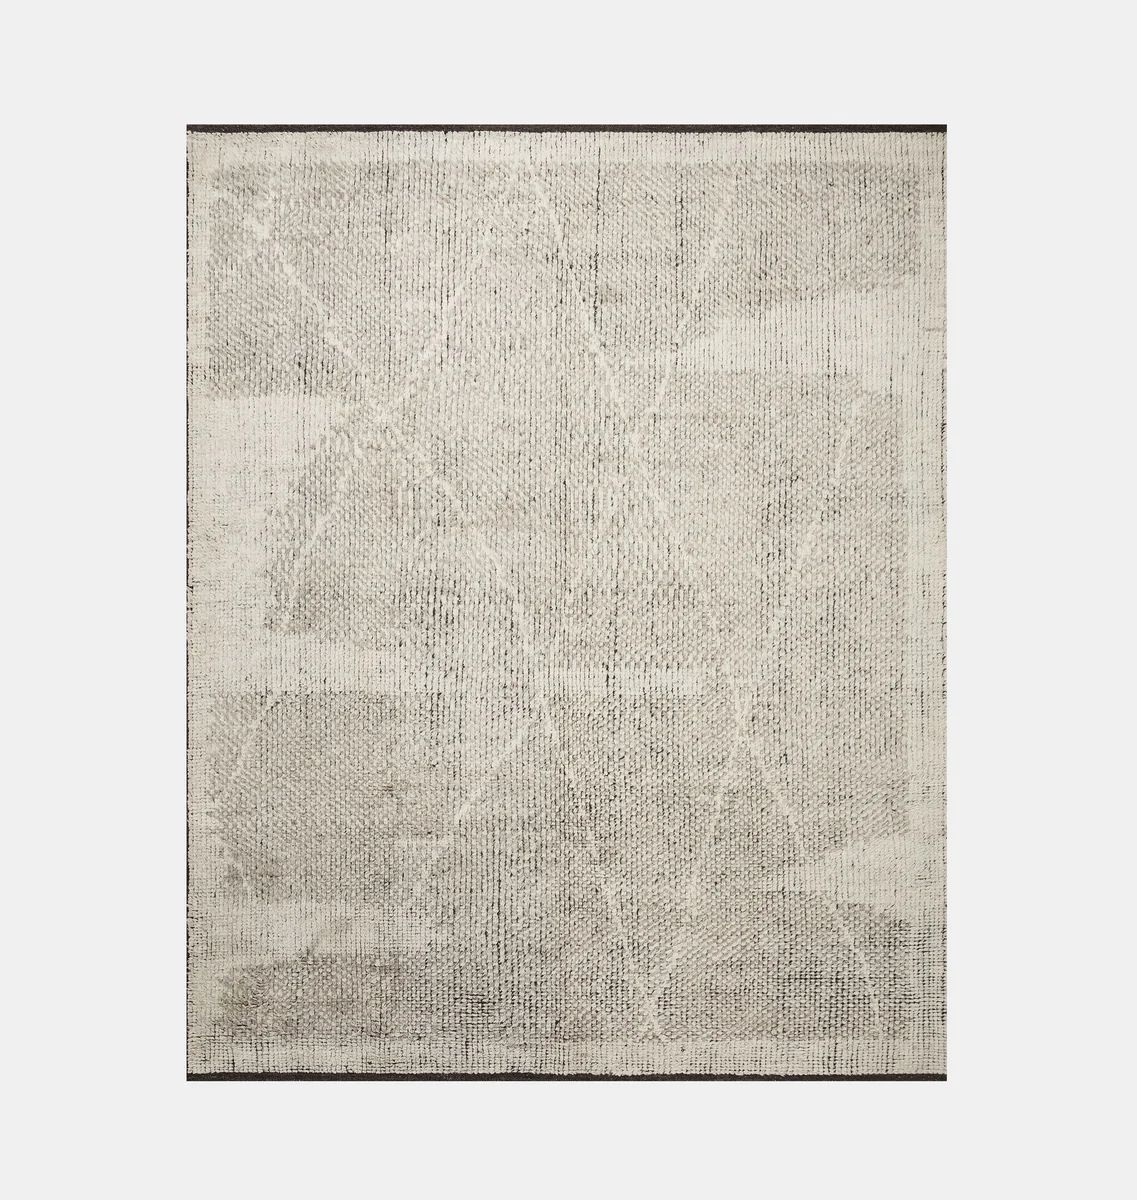 Gwyneth GWY-02 Ivory / Taupe Area Rug | Shoppe Amber Interiors | Amber Interiors